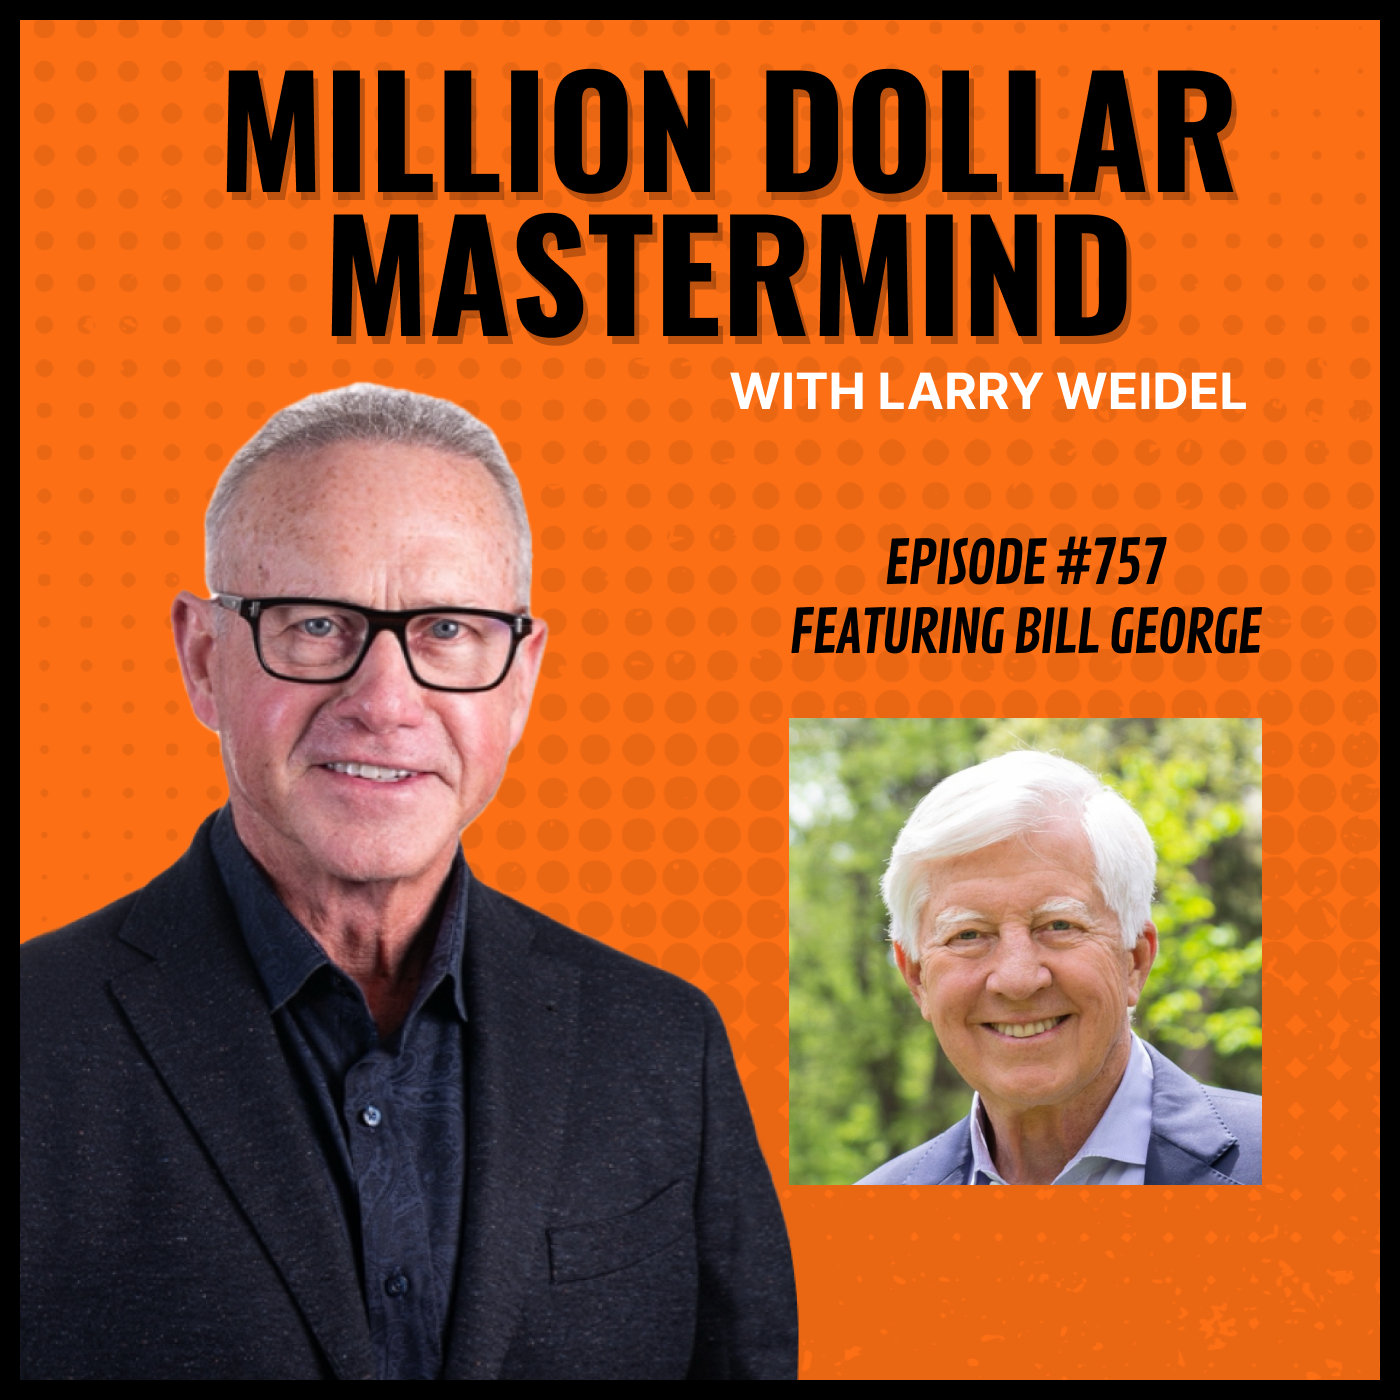 Episode #757 - From Corporate Maverick To Compassionate Leader with Bill George